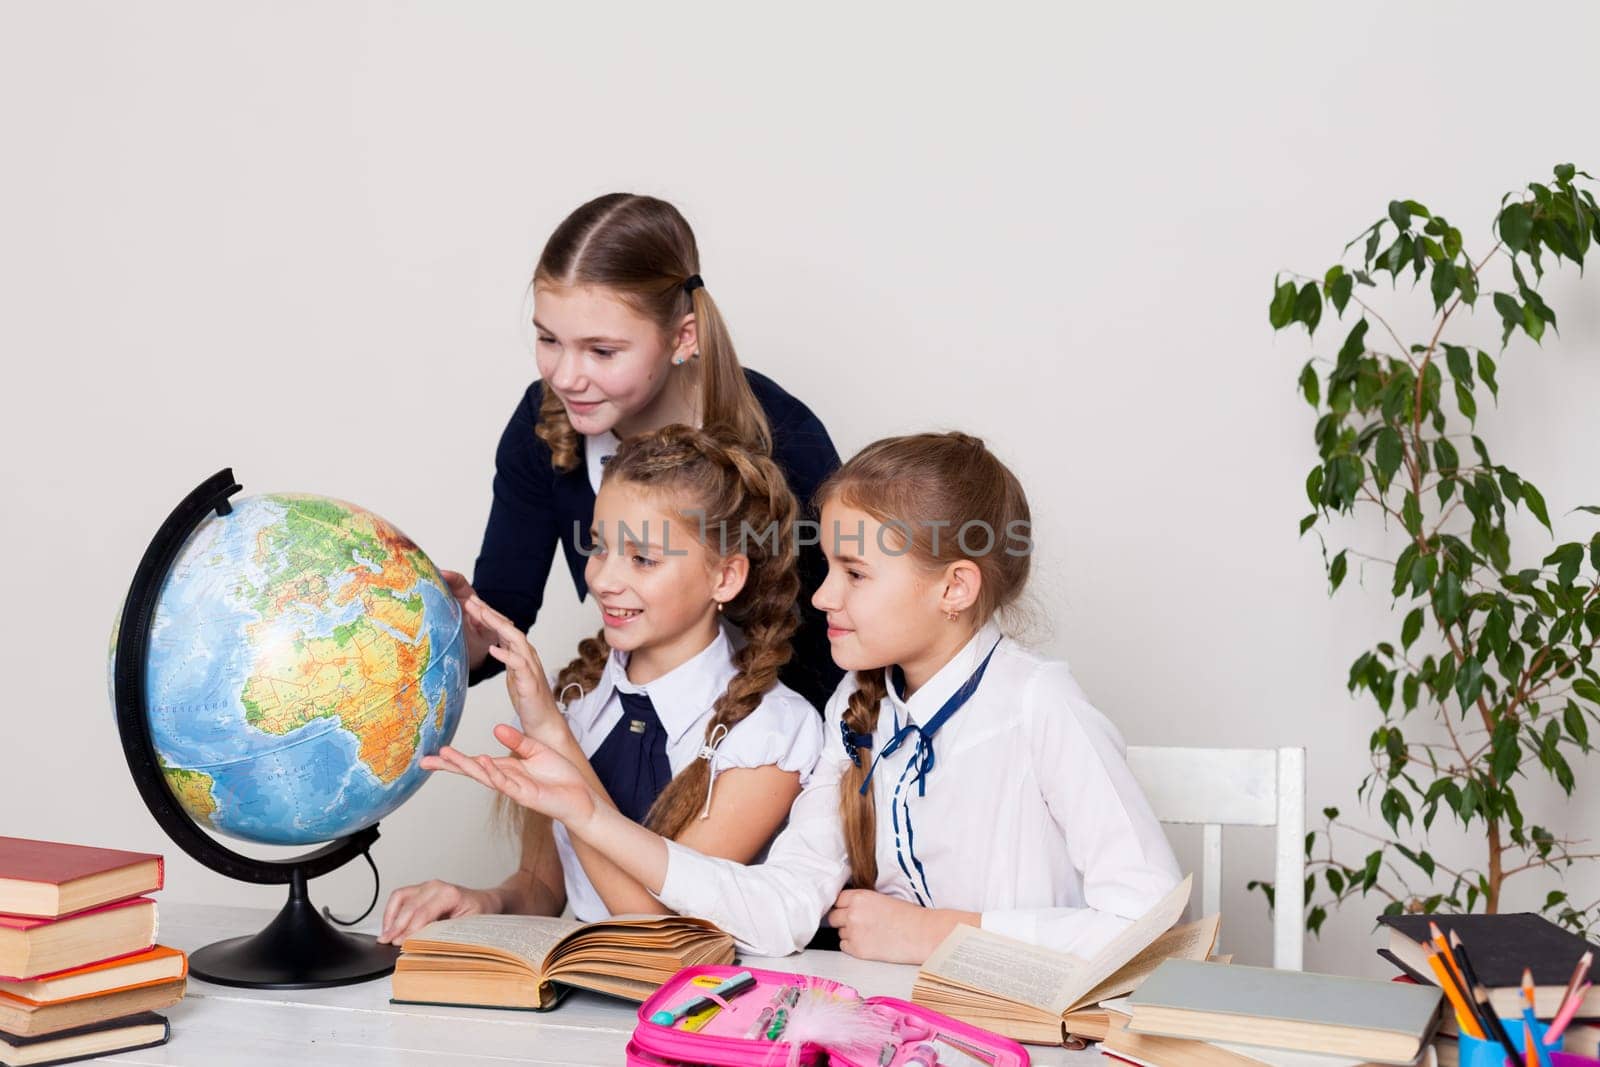 three schoolgirl girls with books and a globe in geography class at the desk